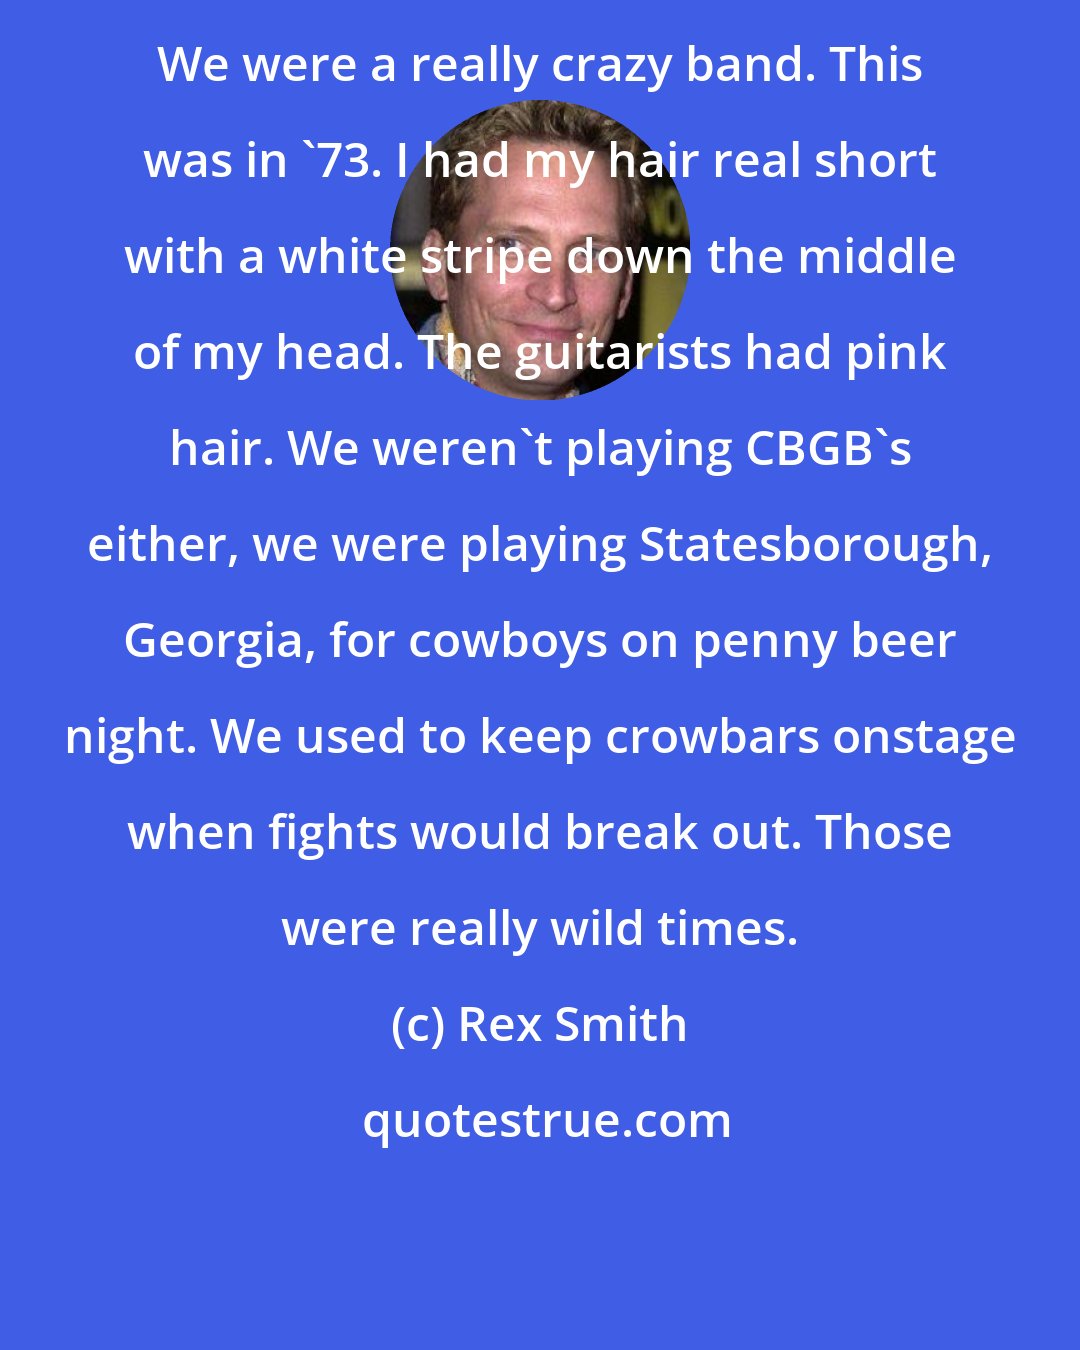 Rex Smith: We were a really crazy band. This was in '73. I had my hair real short with a white stripe down the middle of my head. The guitarists had pink hair. We weren't playing CBGB's either, we were playing Statesborough, Georgia, for cowboys on penny beer night. We used to keep crowbars onstage when fights would break out. Those were really wild times.